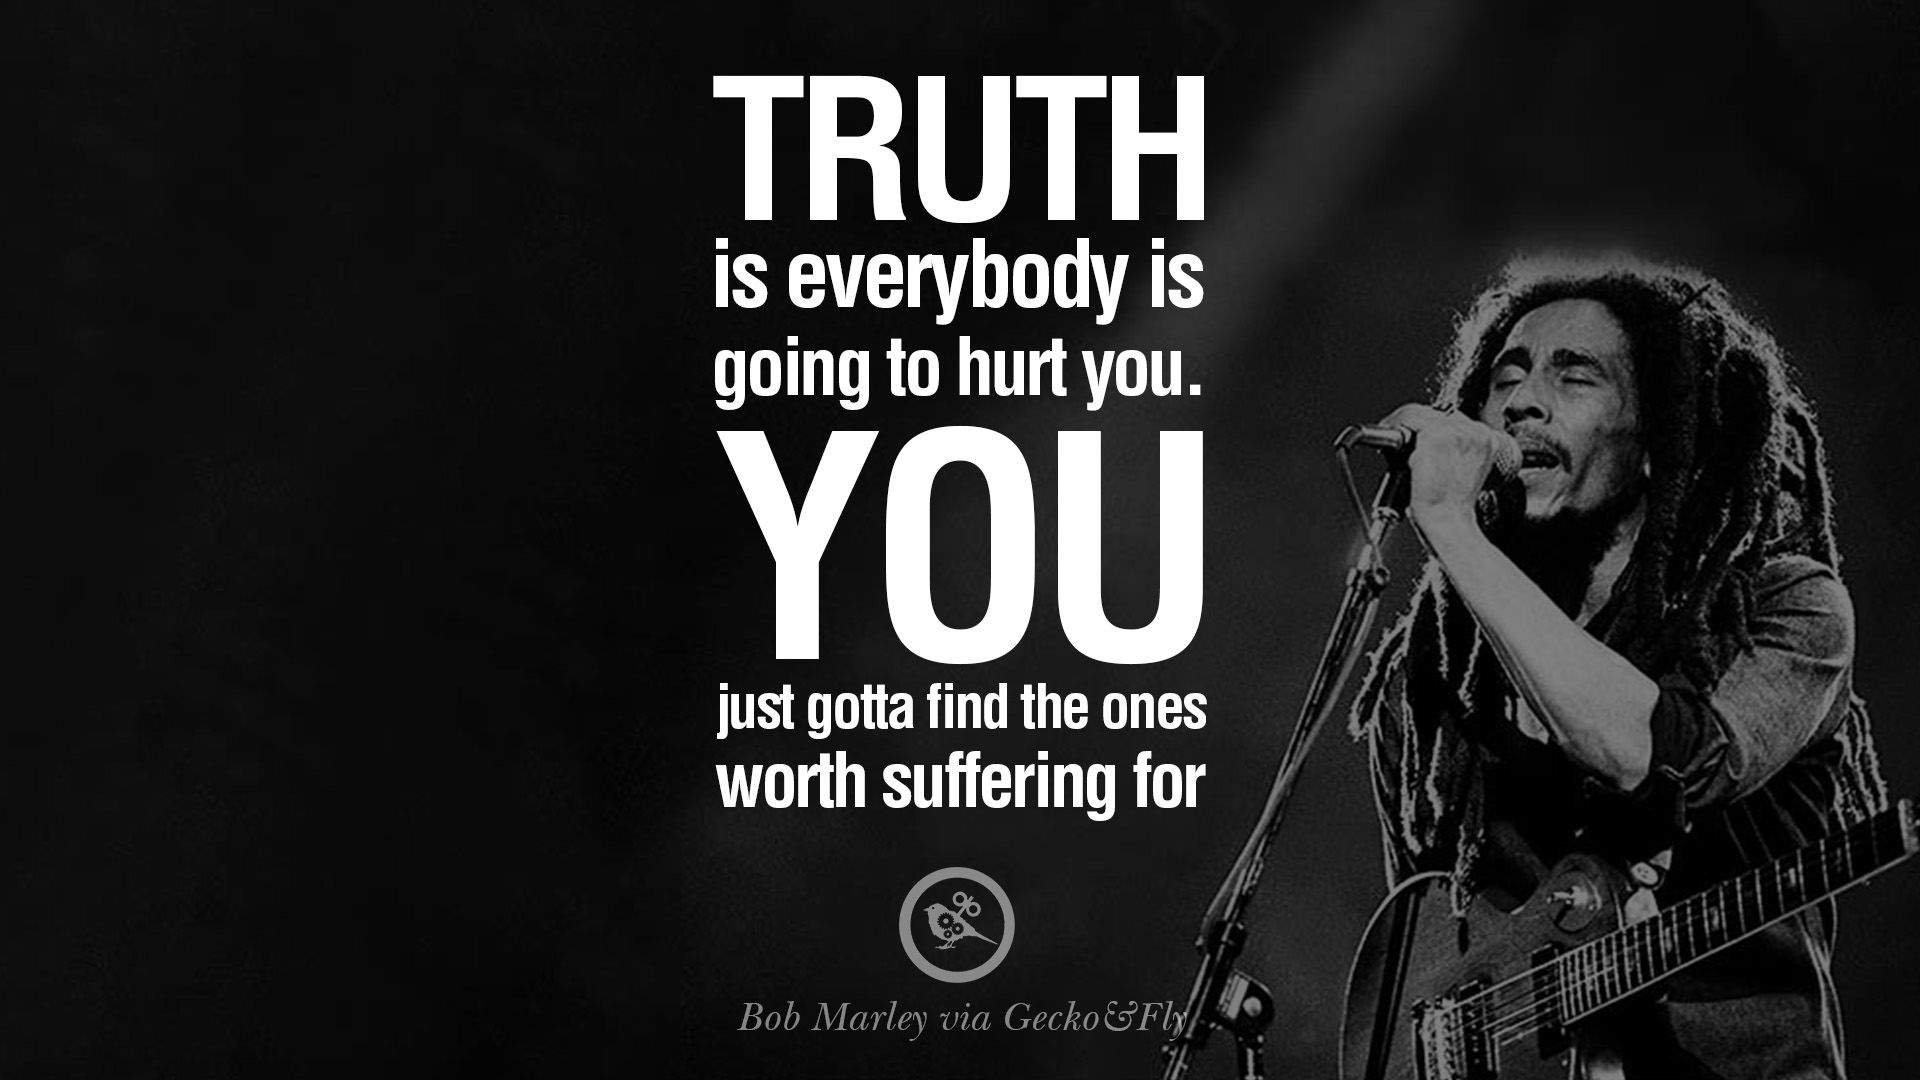 Bob Marley Quotes And Frases On Marijuana, Mentality and Truth